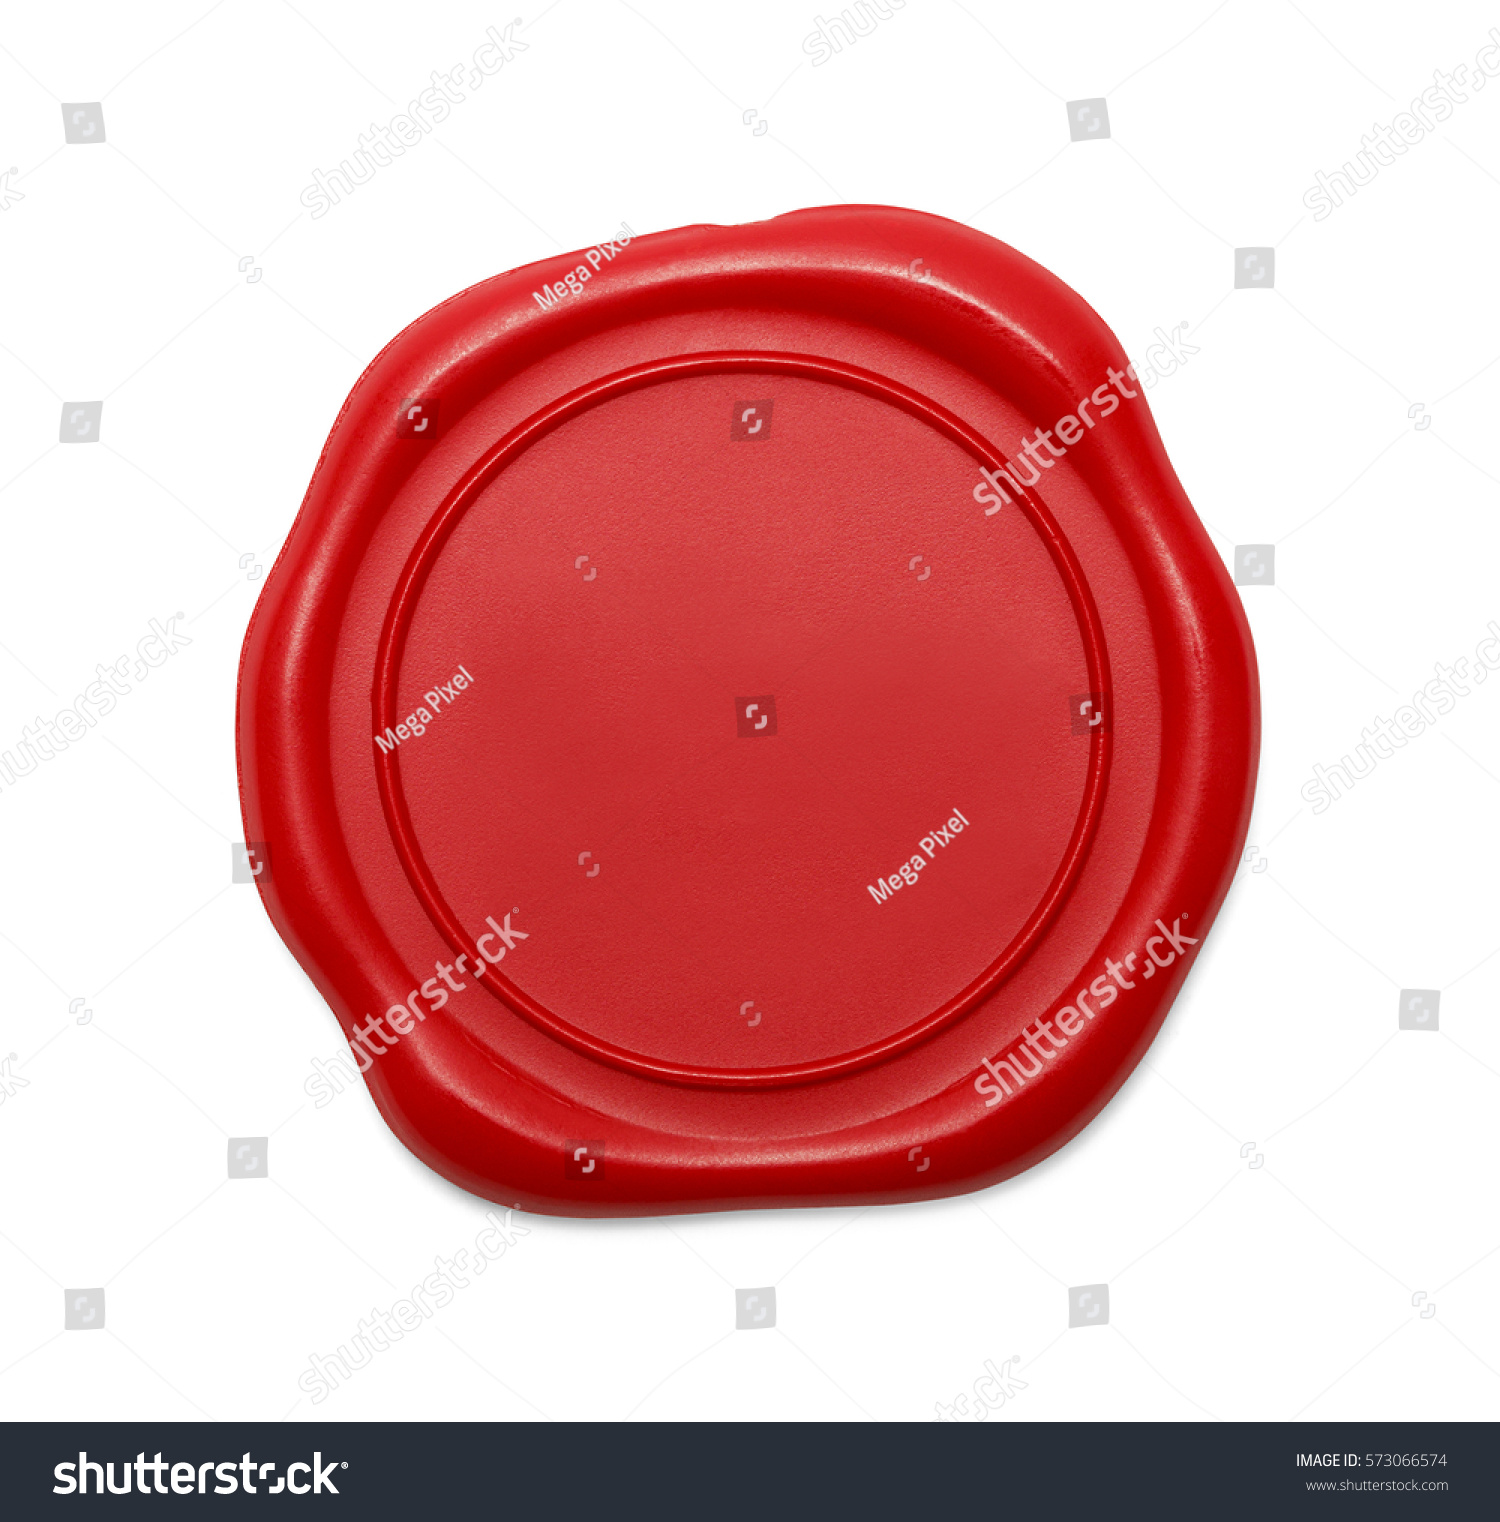 Red Wax Seal with Copy Space Isolated on White Background. #573066574